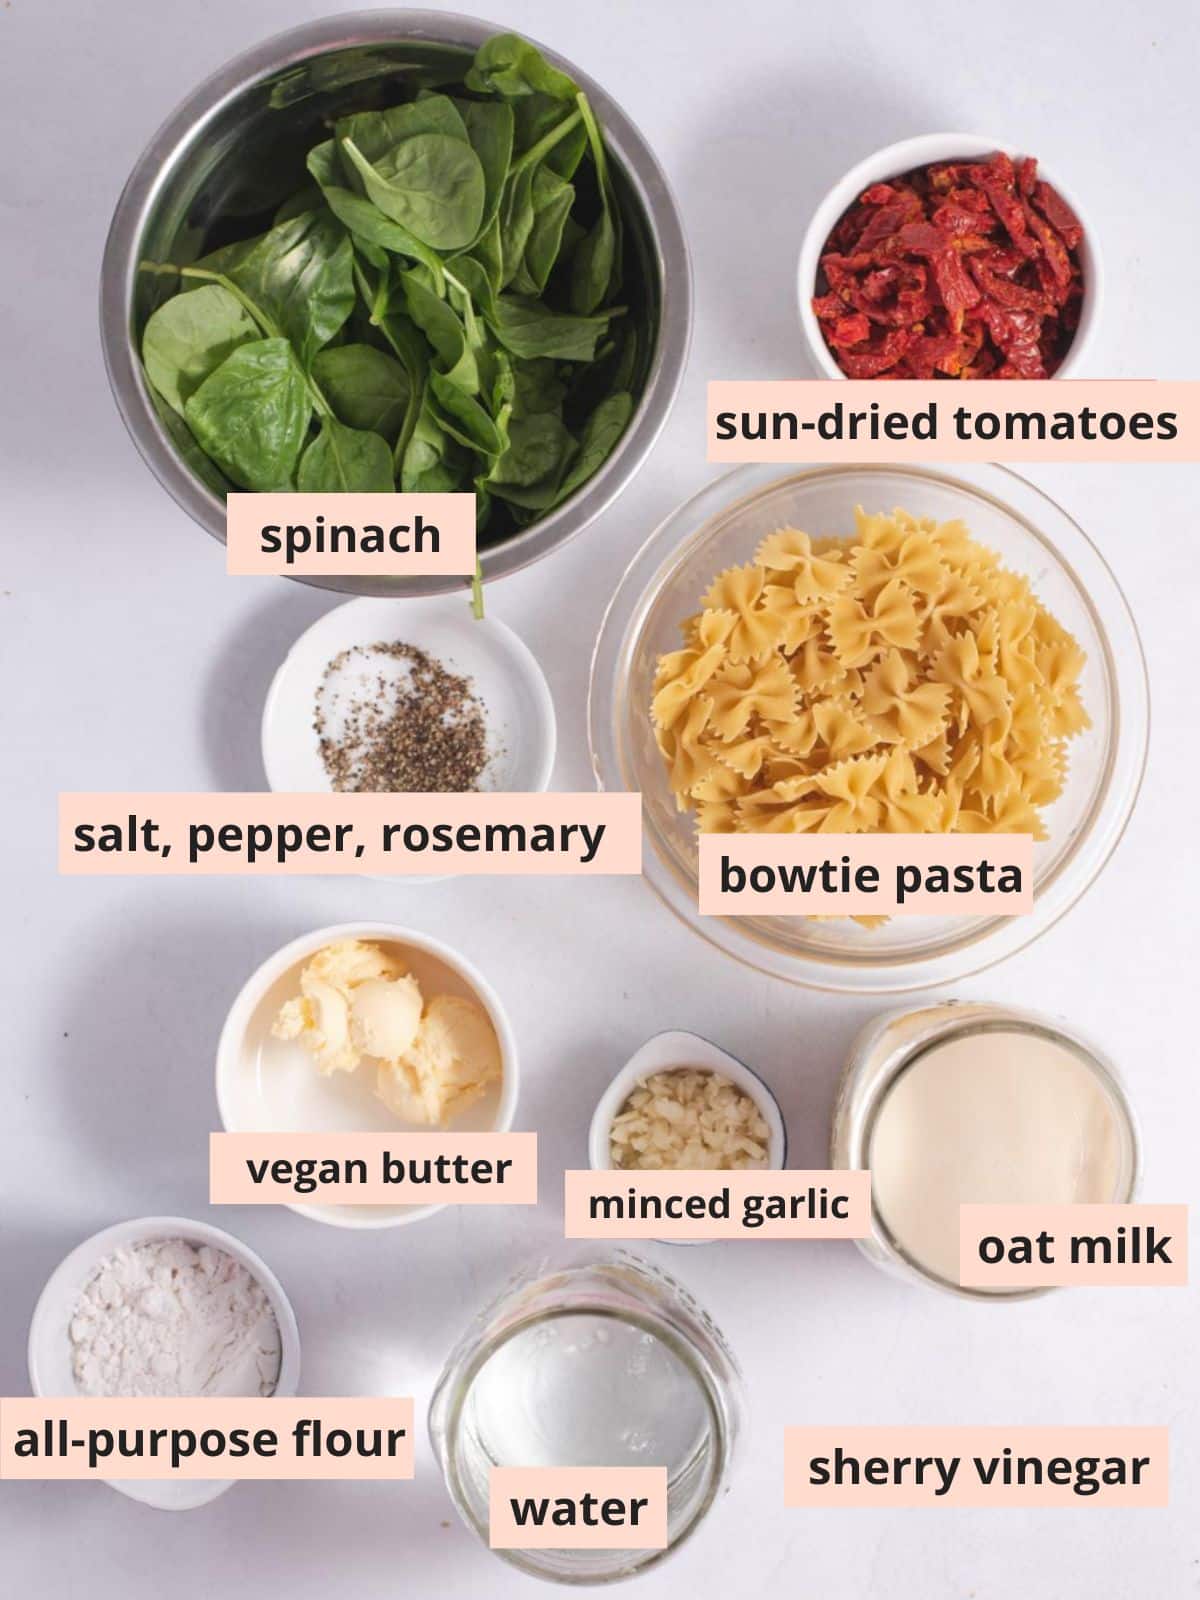 Labeled ingredients used to make sun-dried tomato pasta.